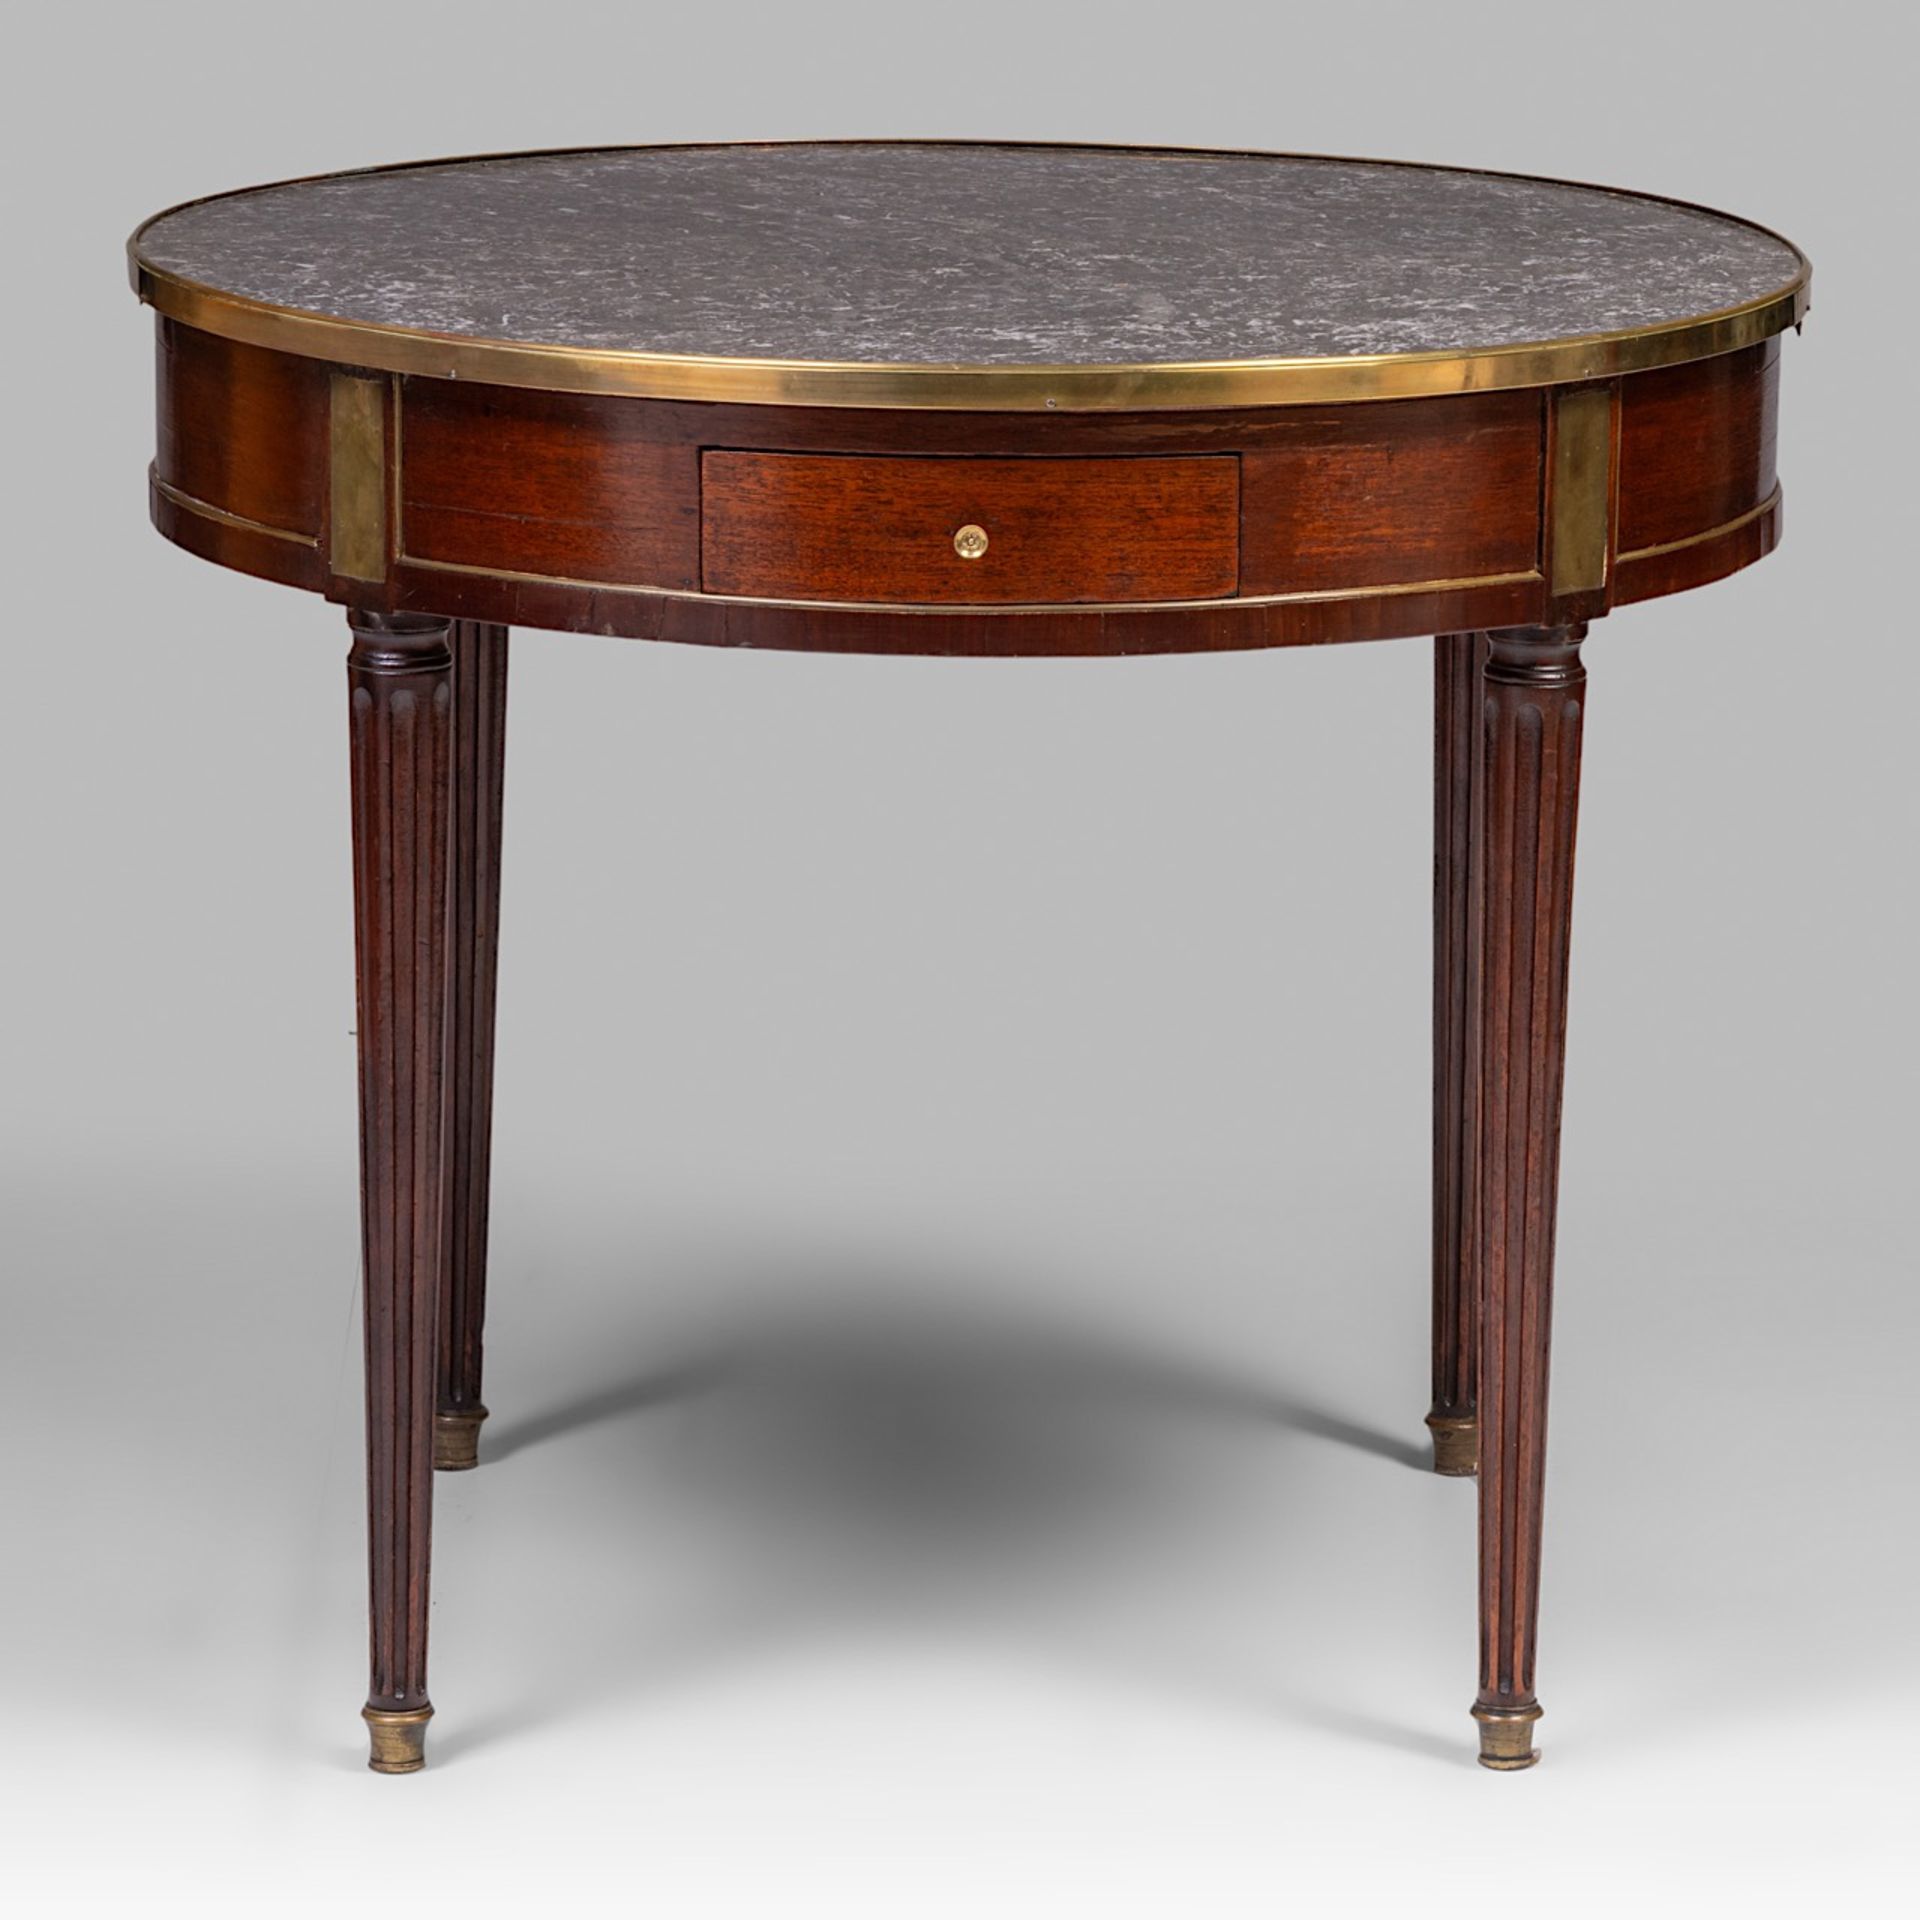 A Louis XVI bouillotte table with a marble top and gilded bronze mounts, H 73 - dia 85 cm - Image 2 of 8